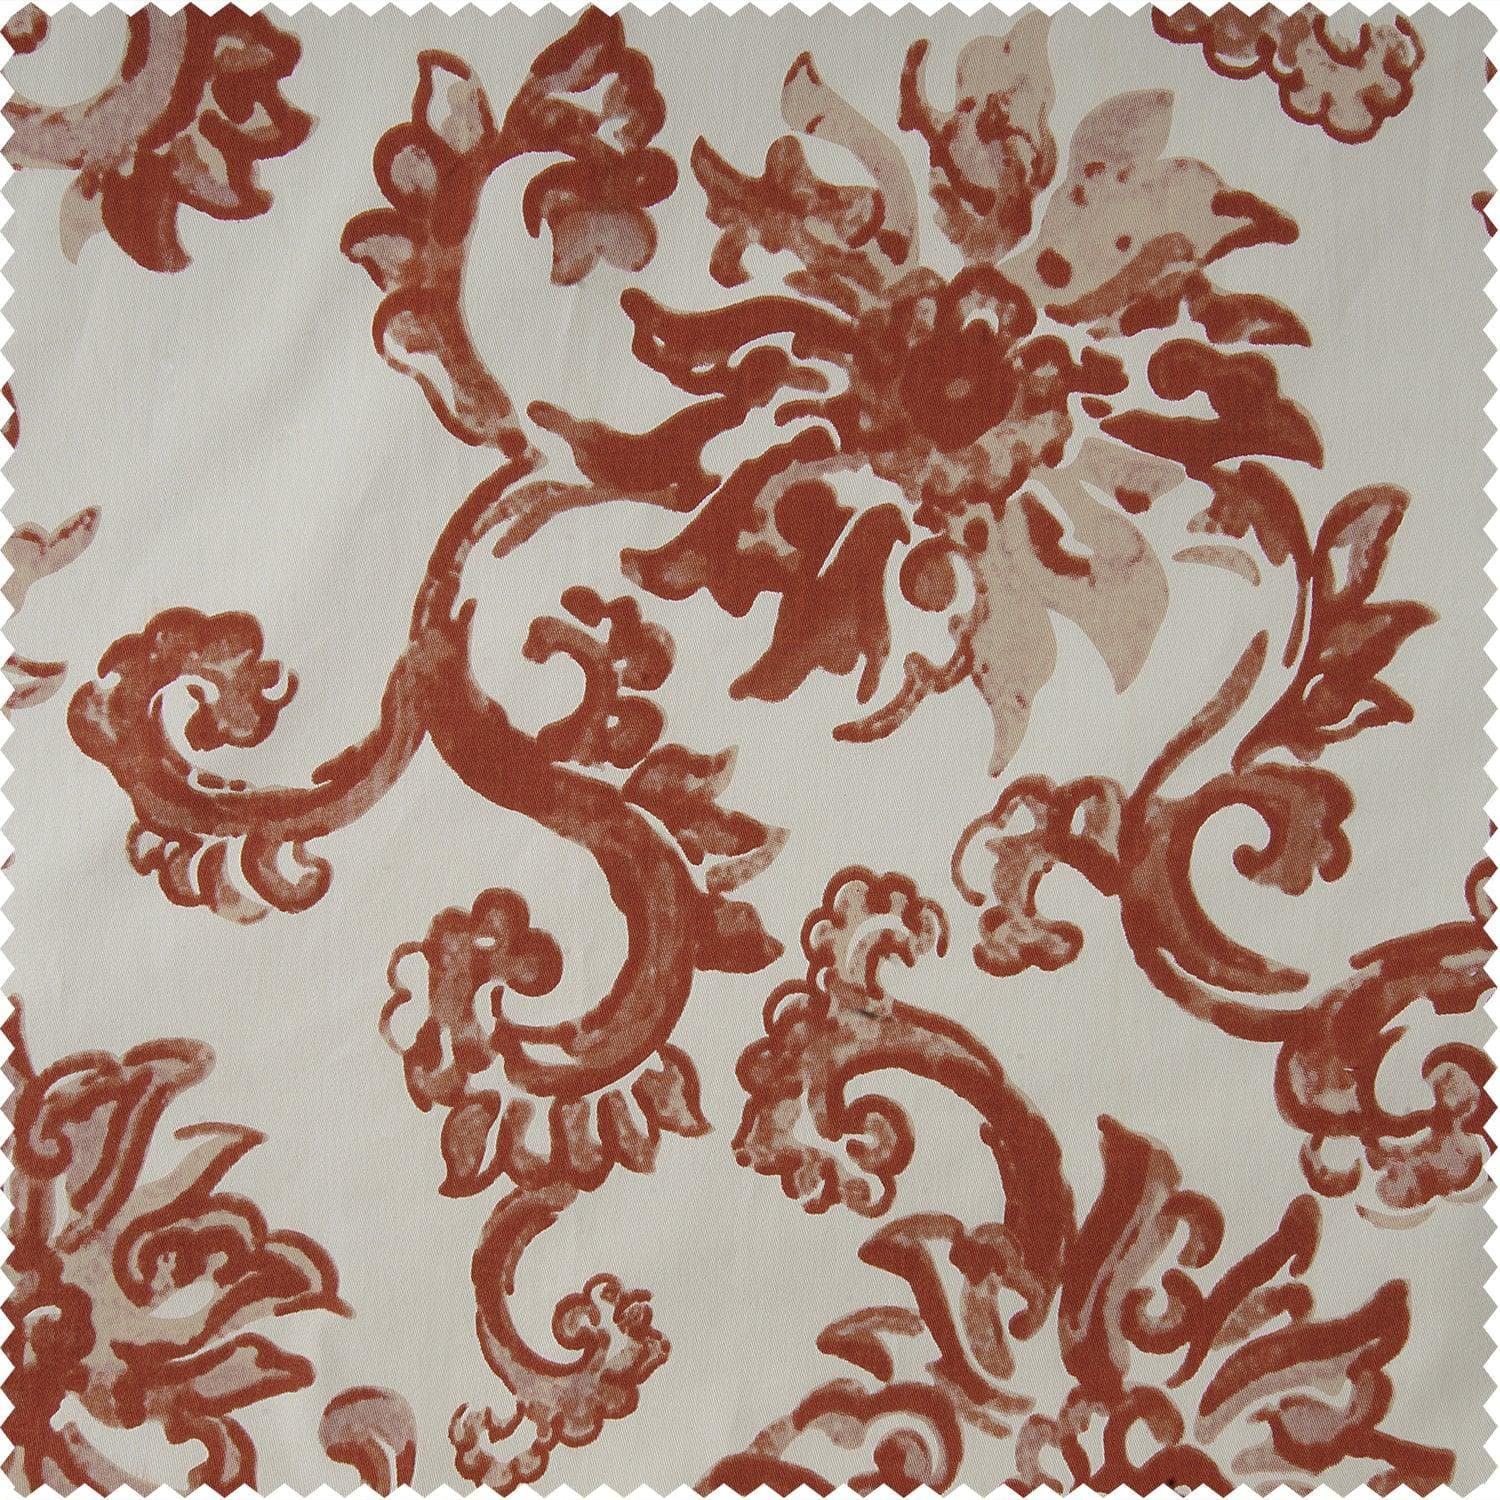 Indonesian Rust Printed Cotton Hotel Blackout Curtain